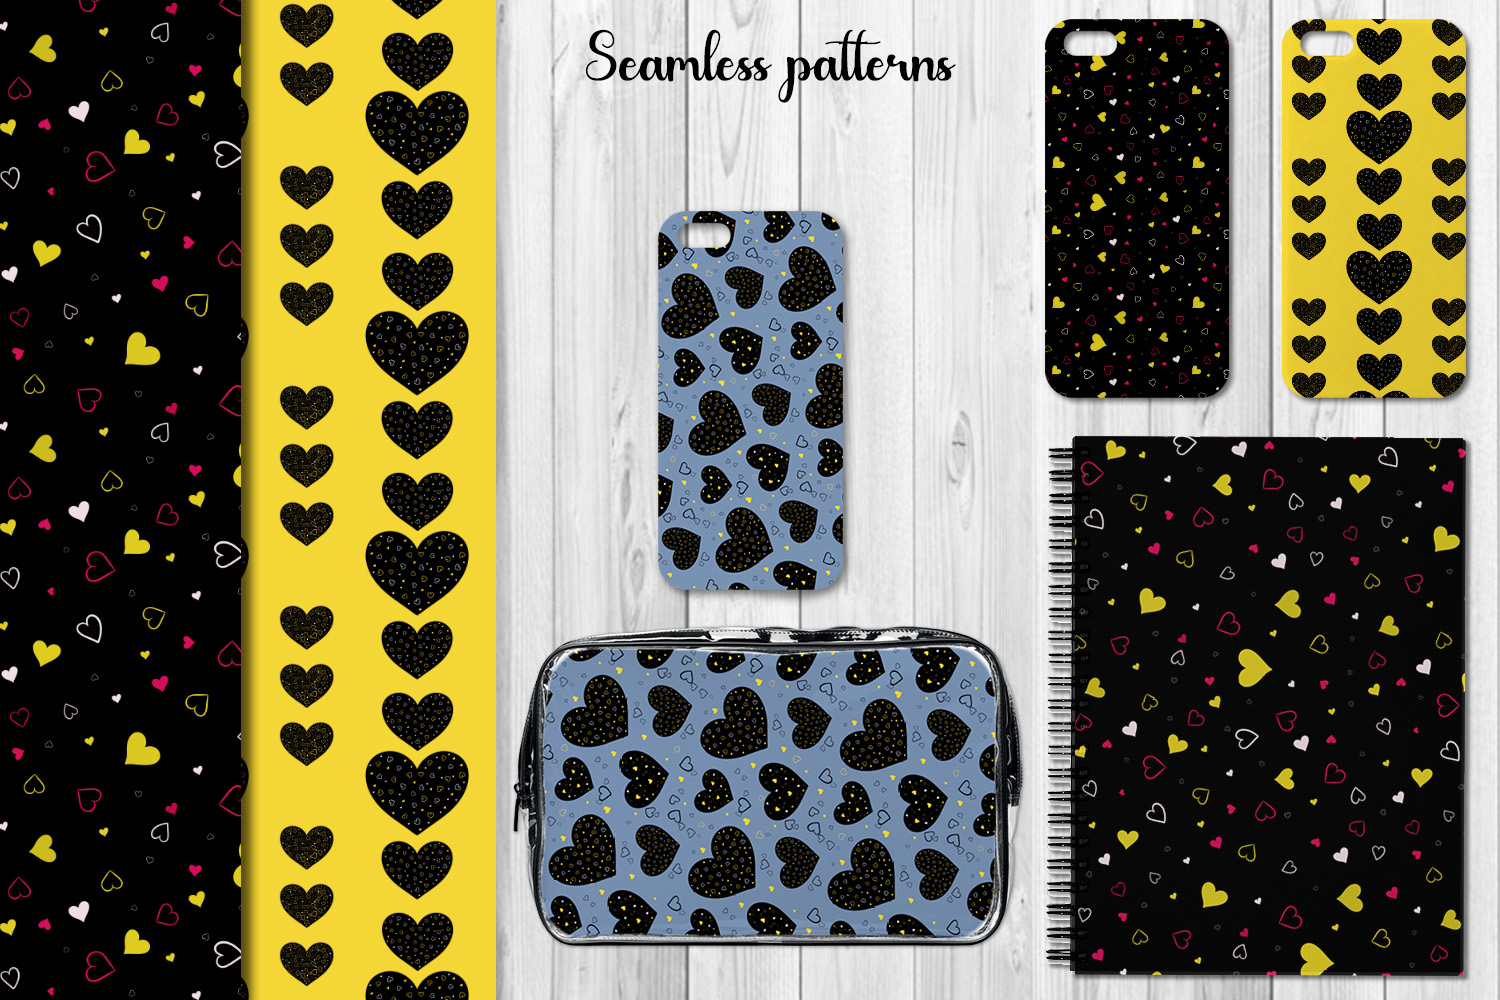 Use these hearts prints for your cometic bag or phone case.